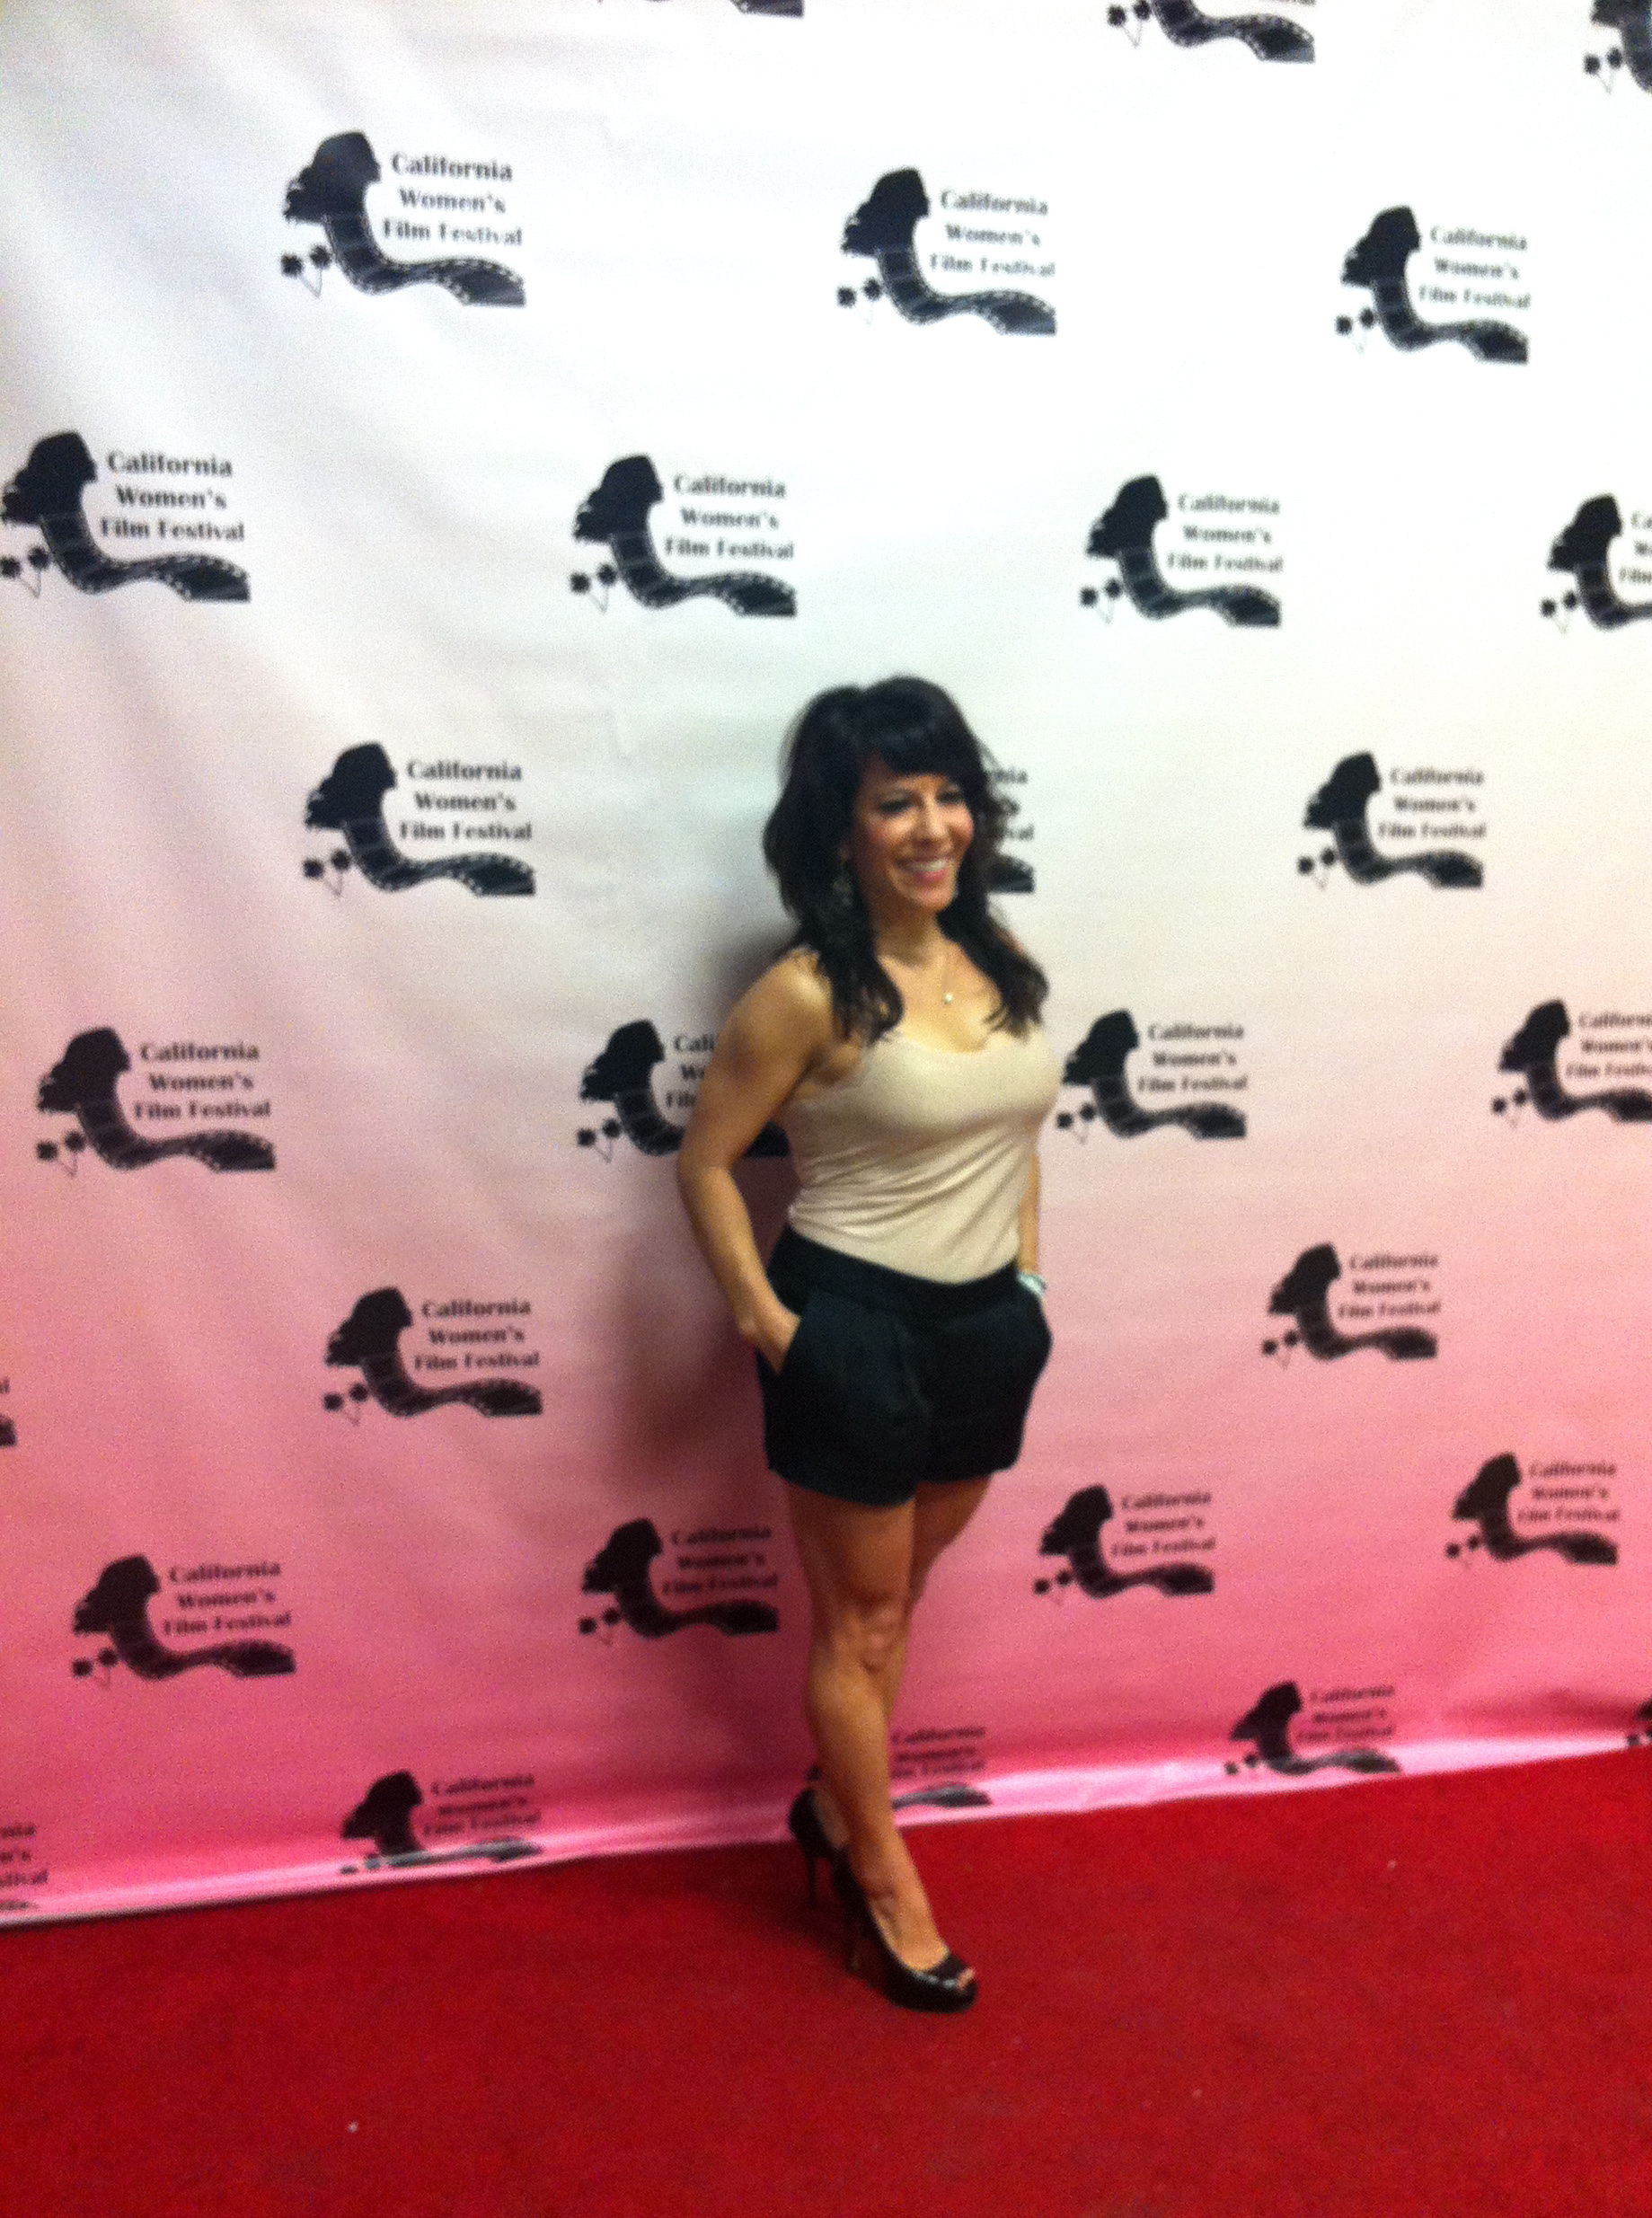 The red carpet press! Mist's music video, Panic Button was an official selection at the 1st Annual Women's Film Festival in North Hollywood, Ca., 1/24/15